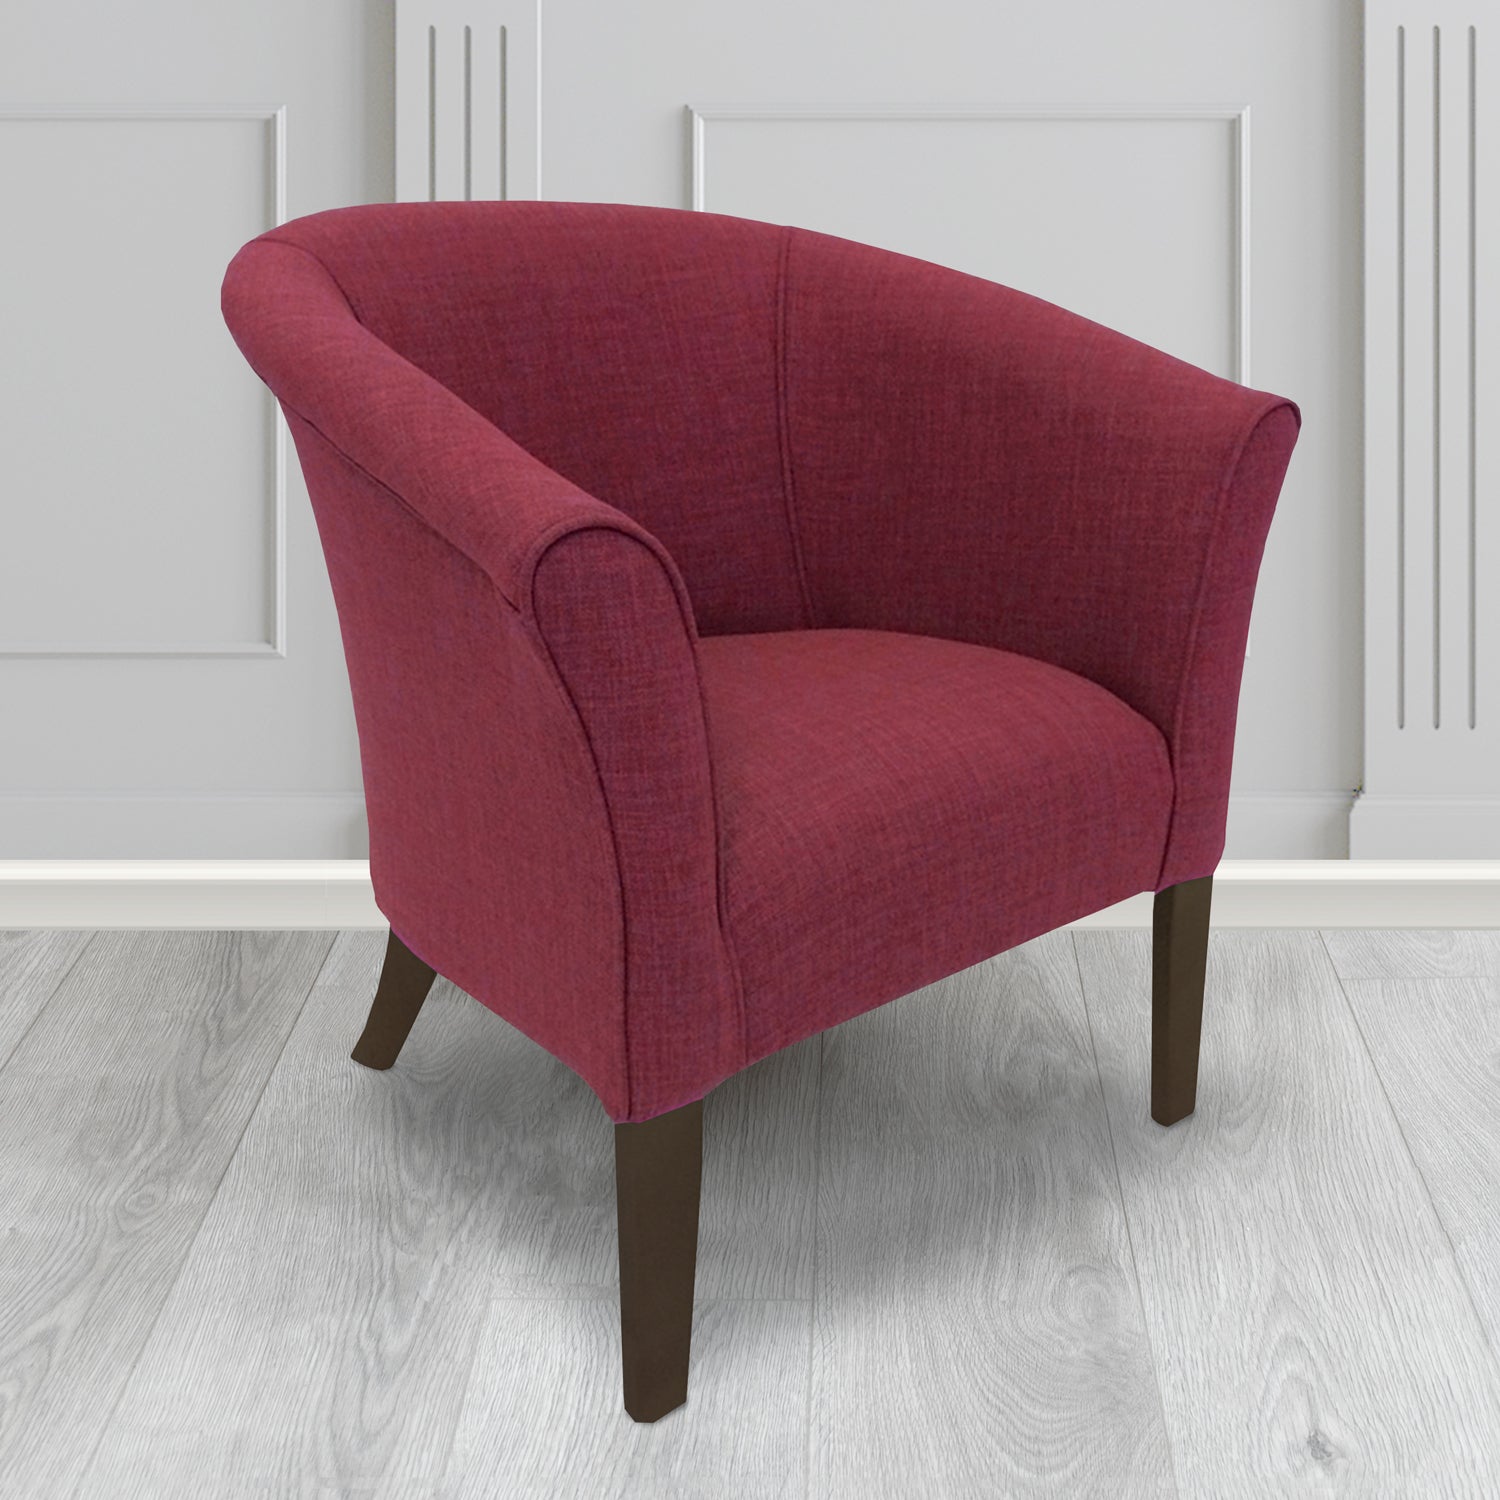 Quill Tub Chair in Linetta Plum Crib 5 Plain Fabric - Antimicrobial, Stain Resistant & Waterproof - The Tub Chair Shop